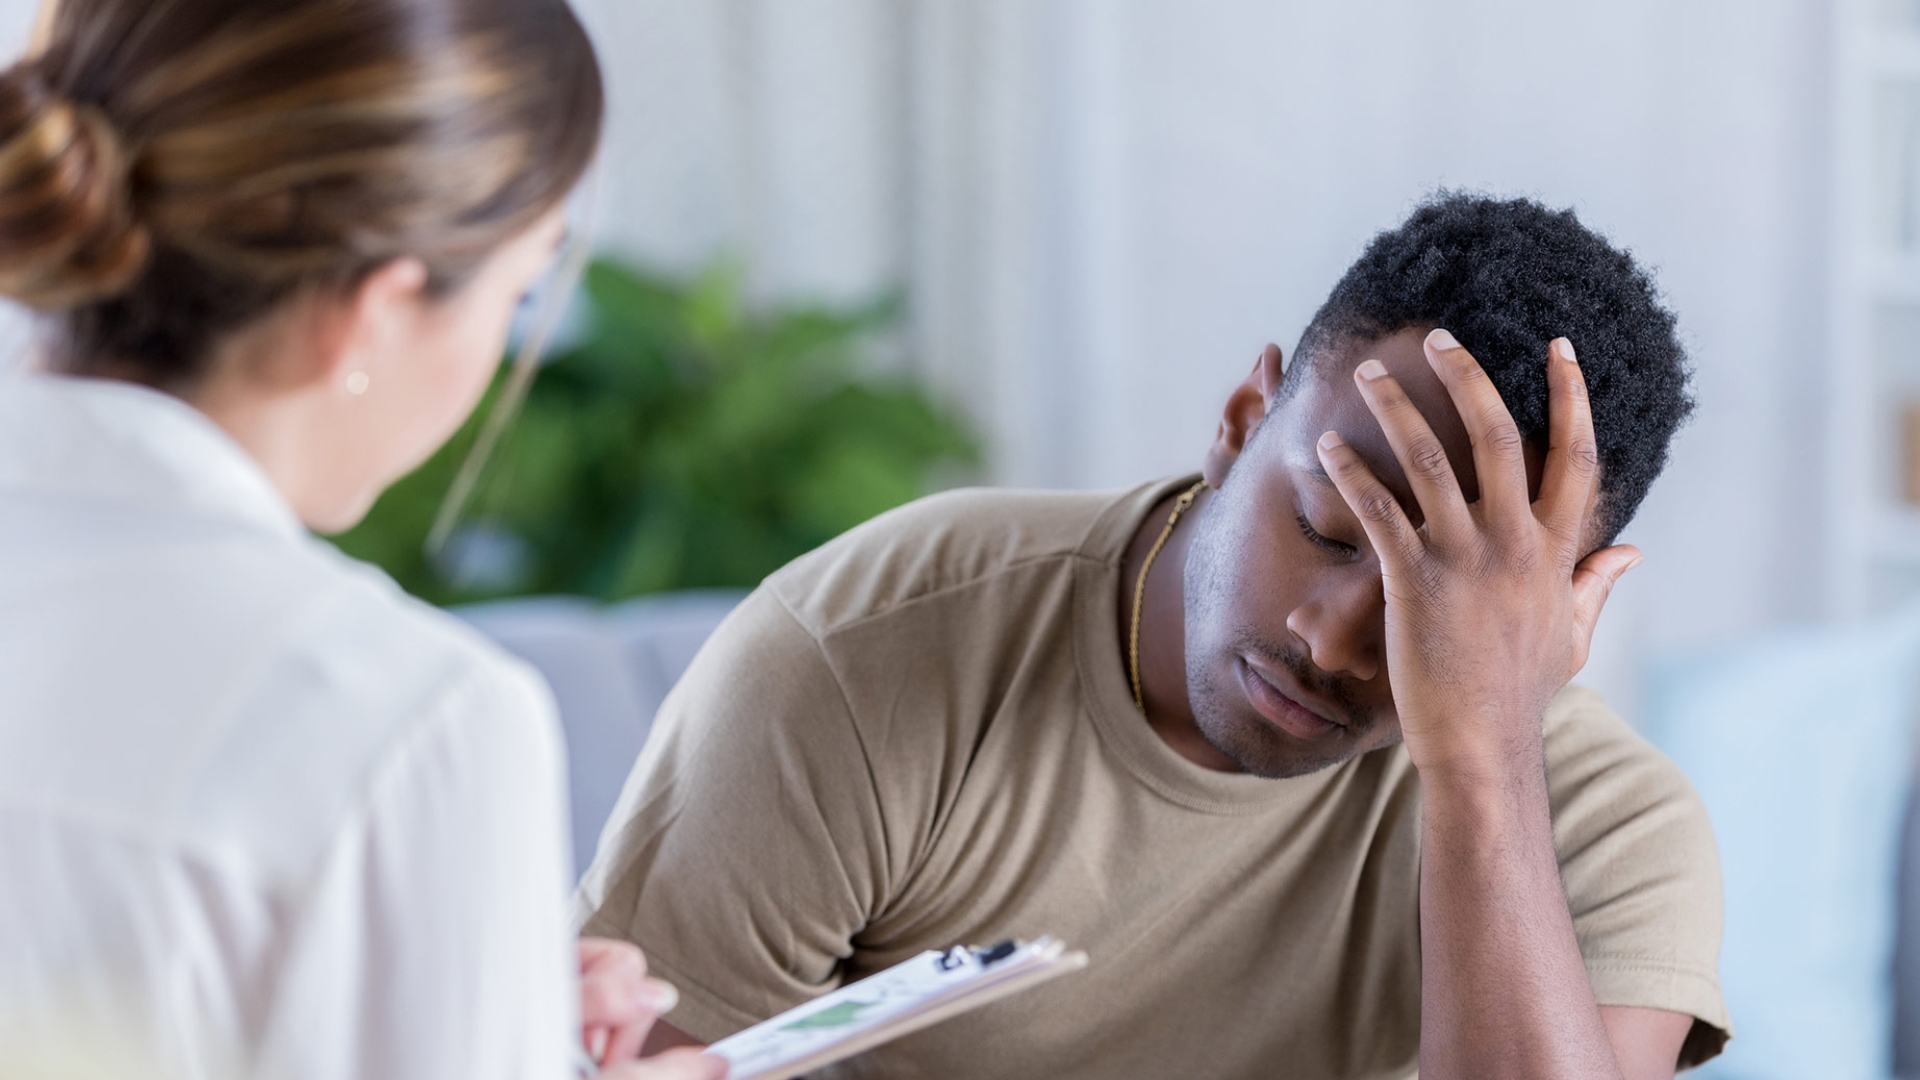 Statistics show that mental health struggles are on the rise among men. So what symptoms should men be aware of — and how can they seek out help when they need it?